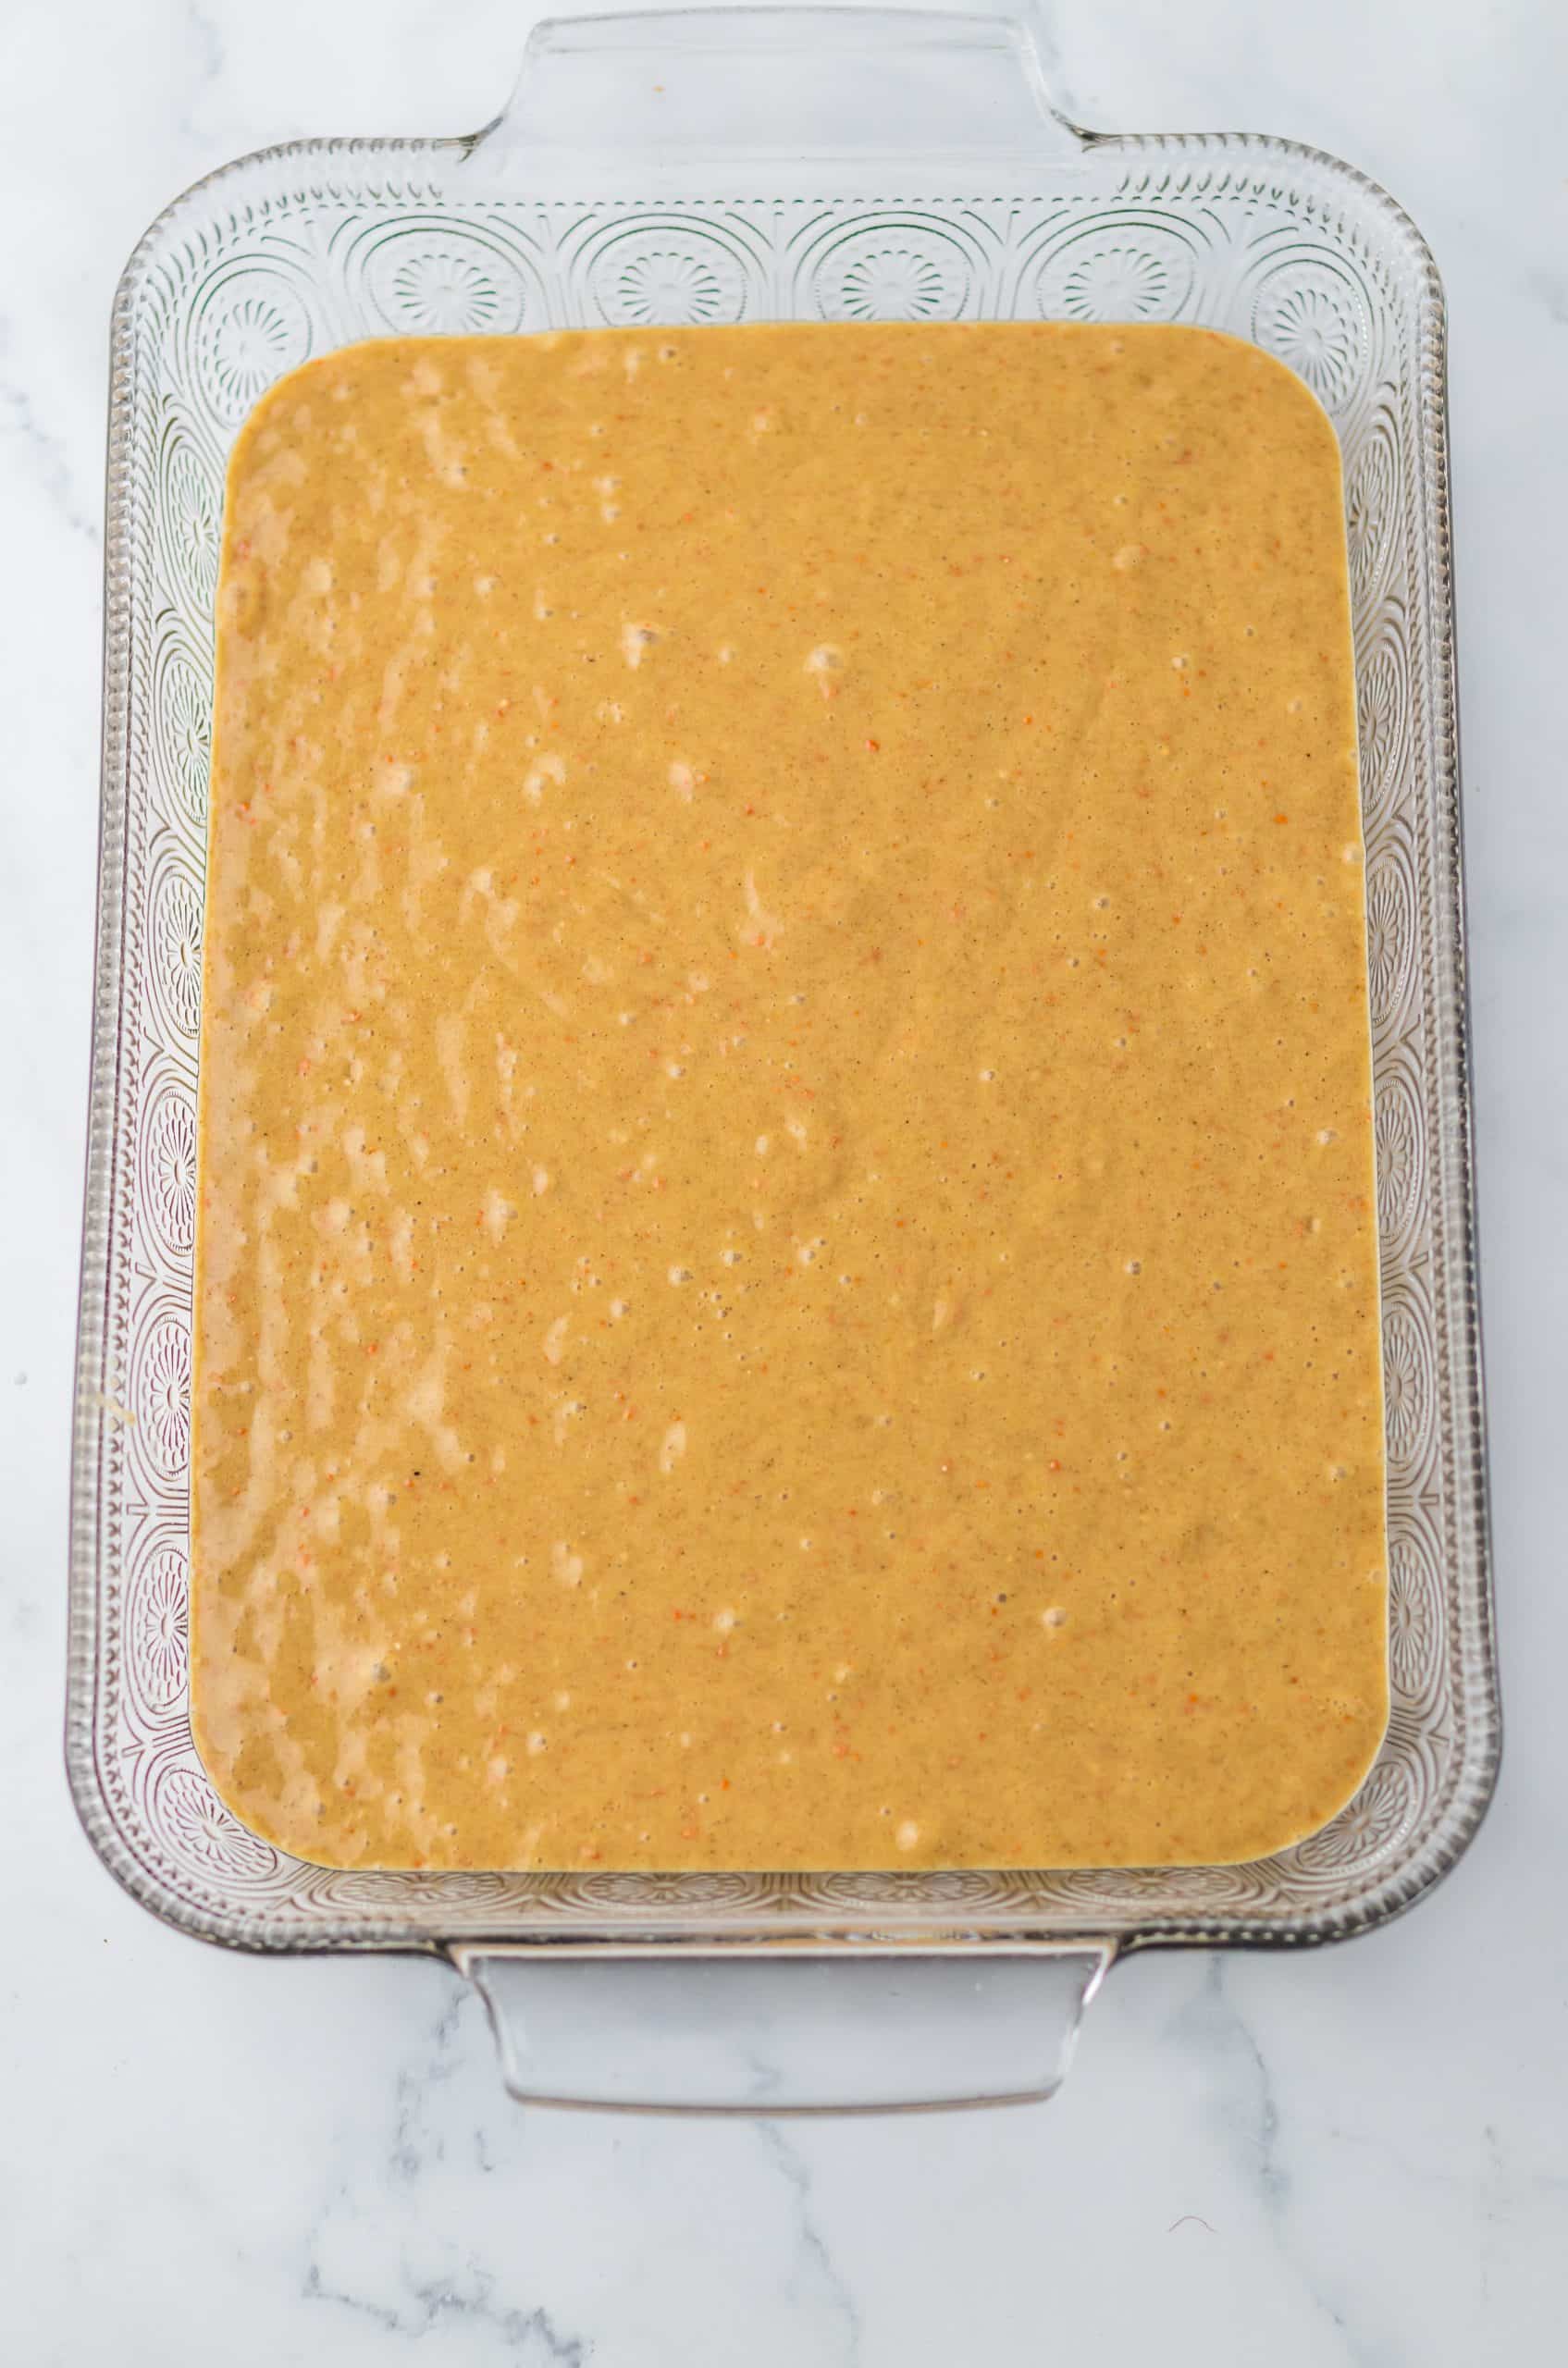 carrot cake batter in a large 9x13 inch glass baking dish